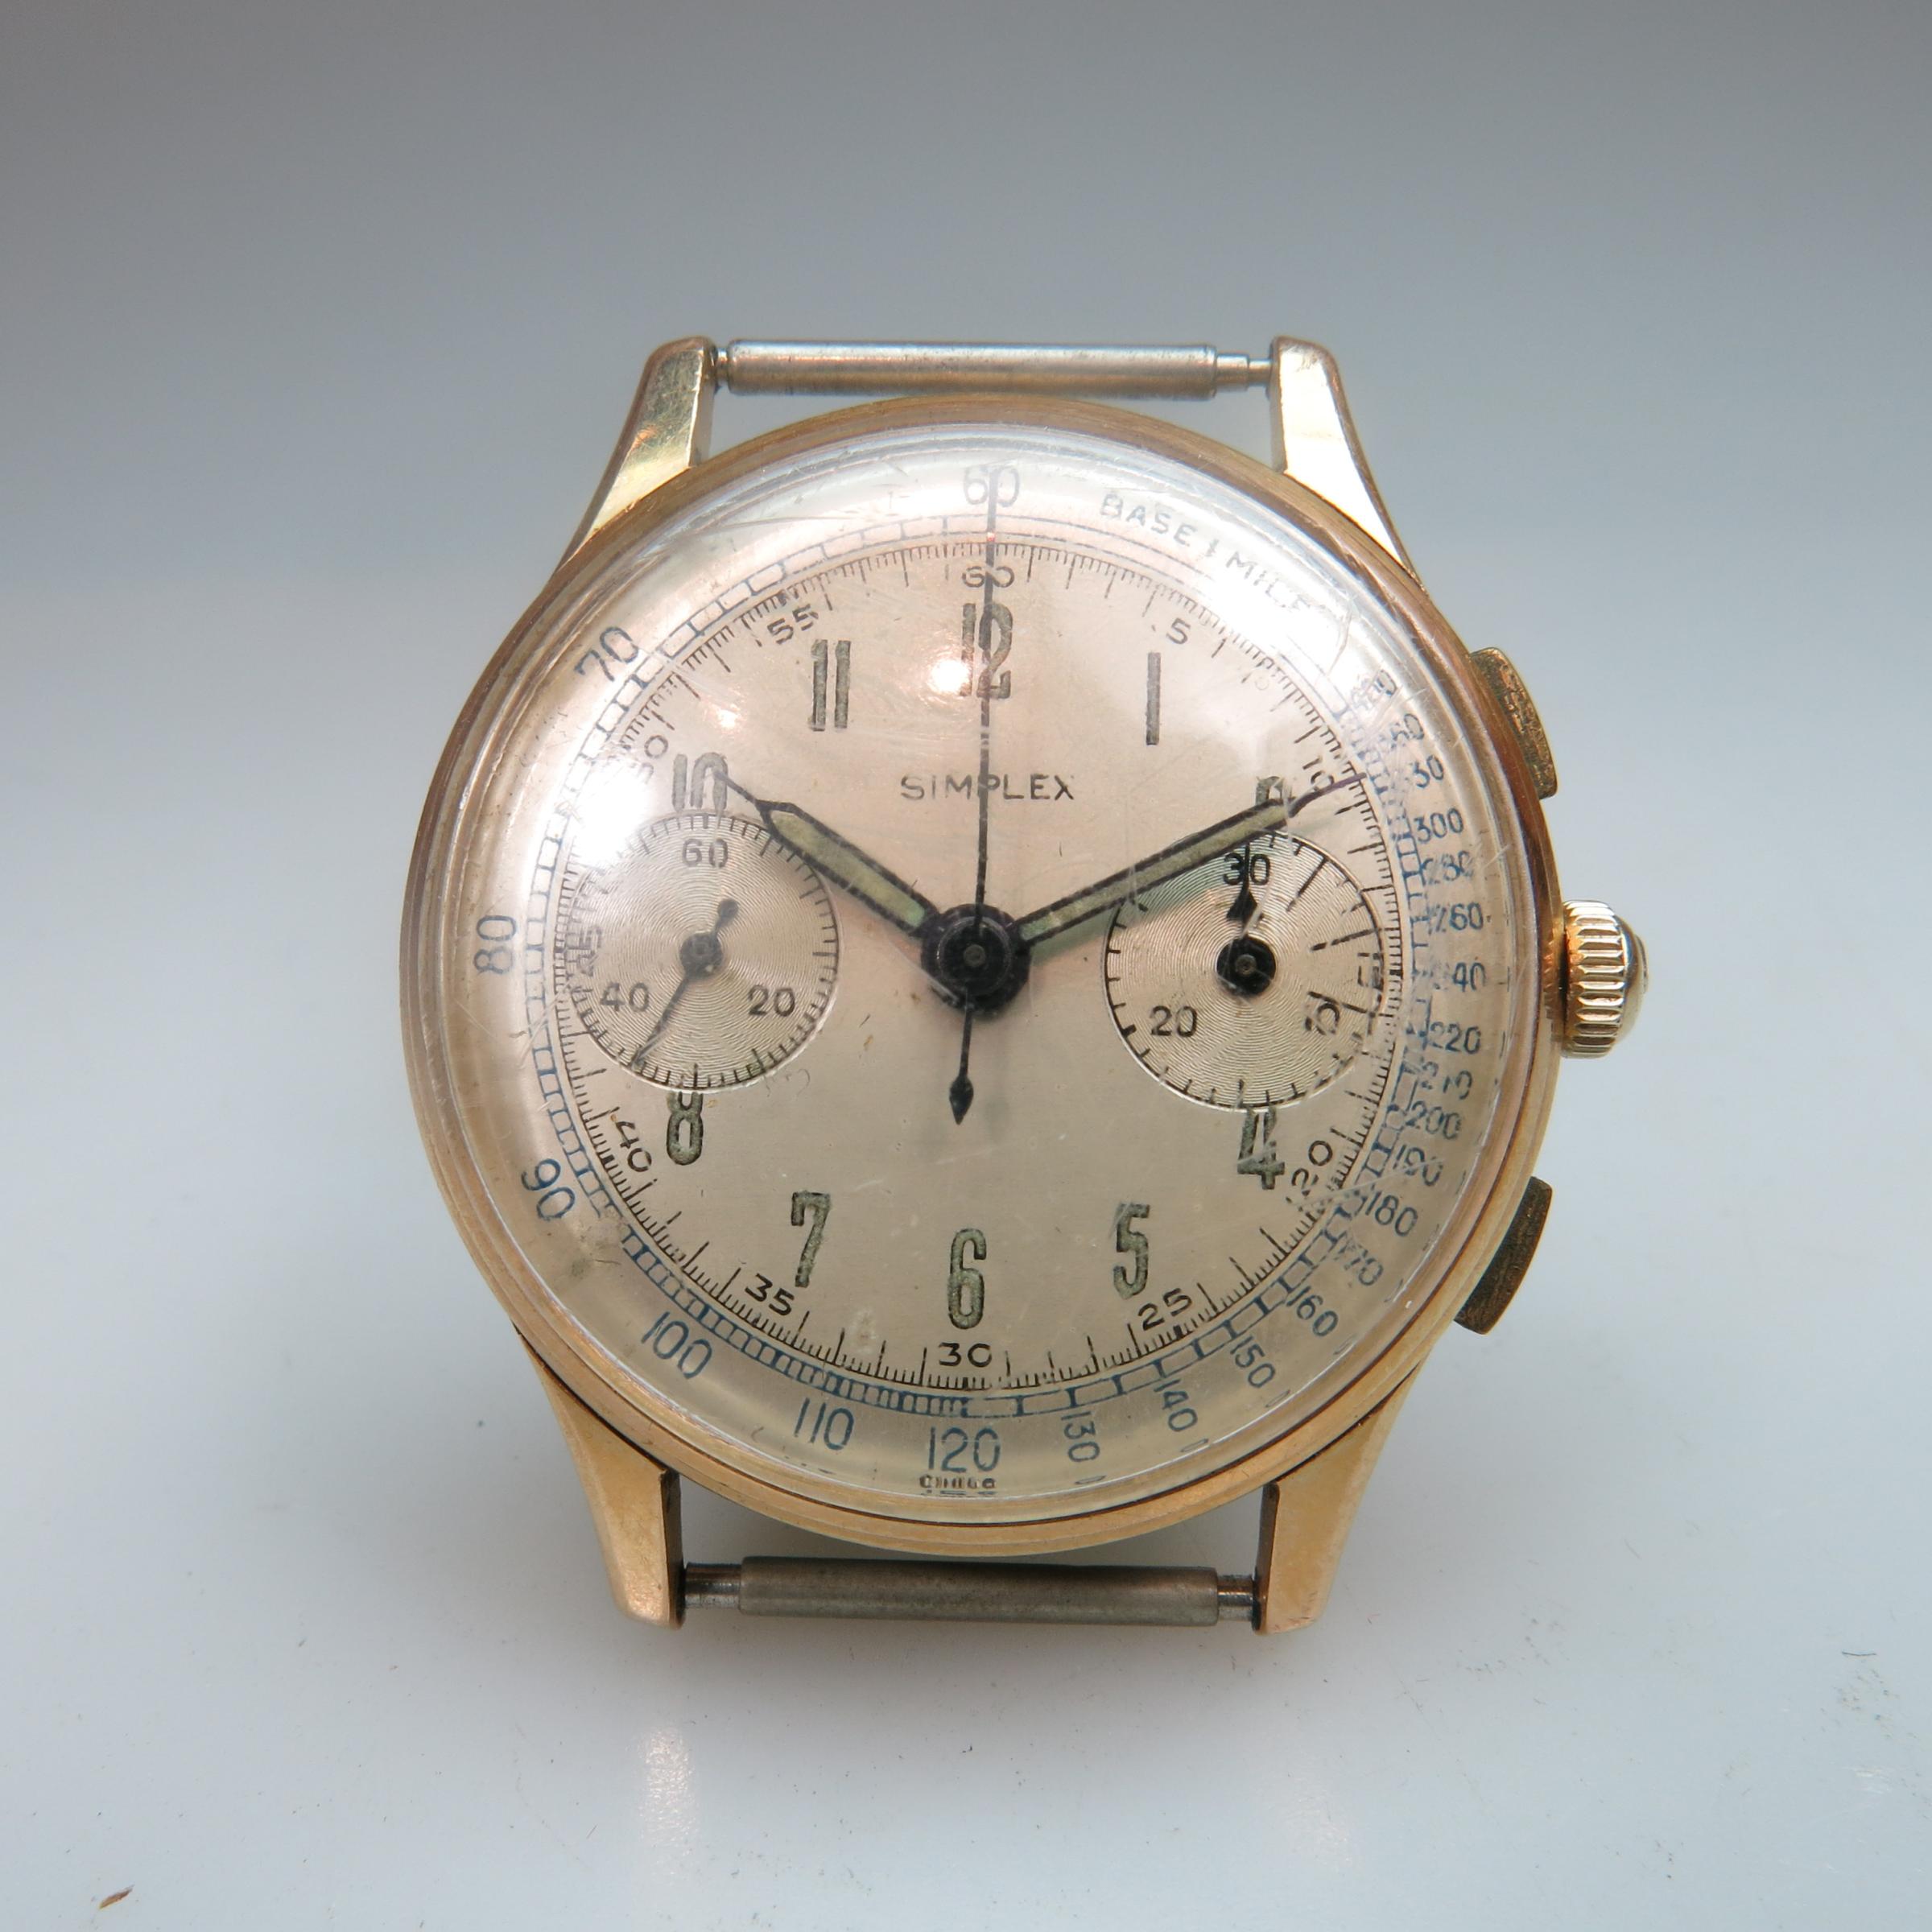 Buttes Watch Co. Wristwatch With Chronograph